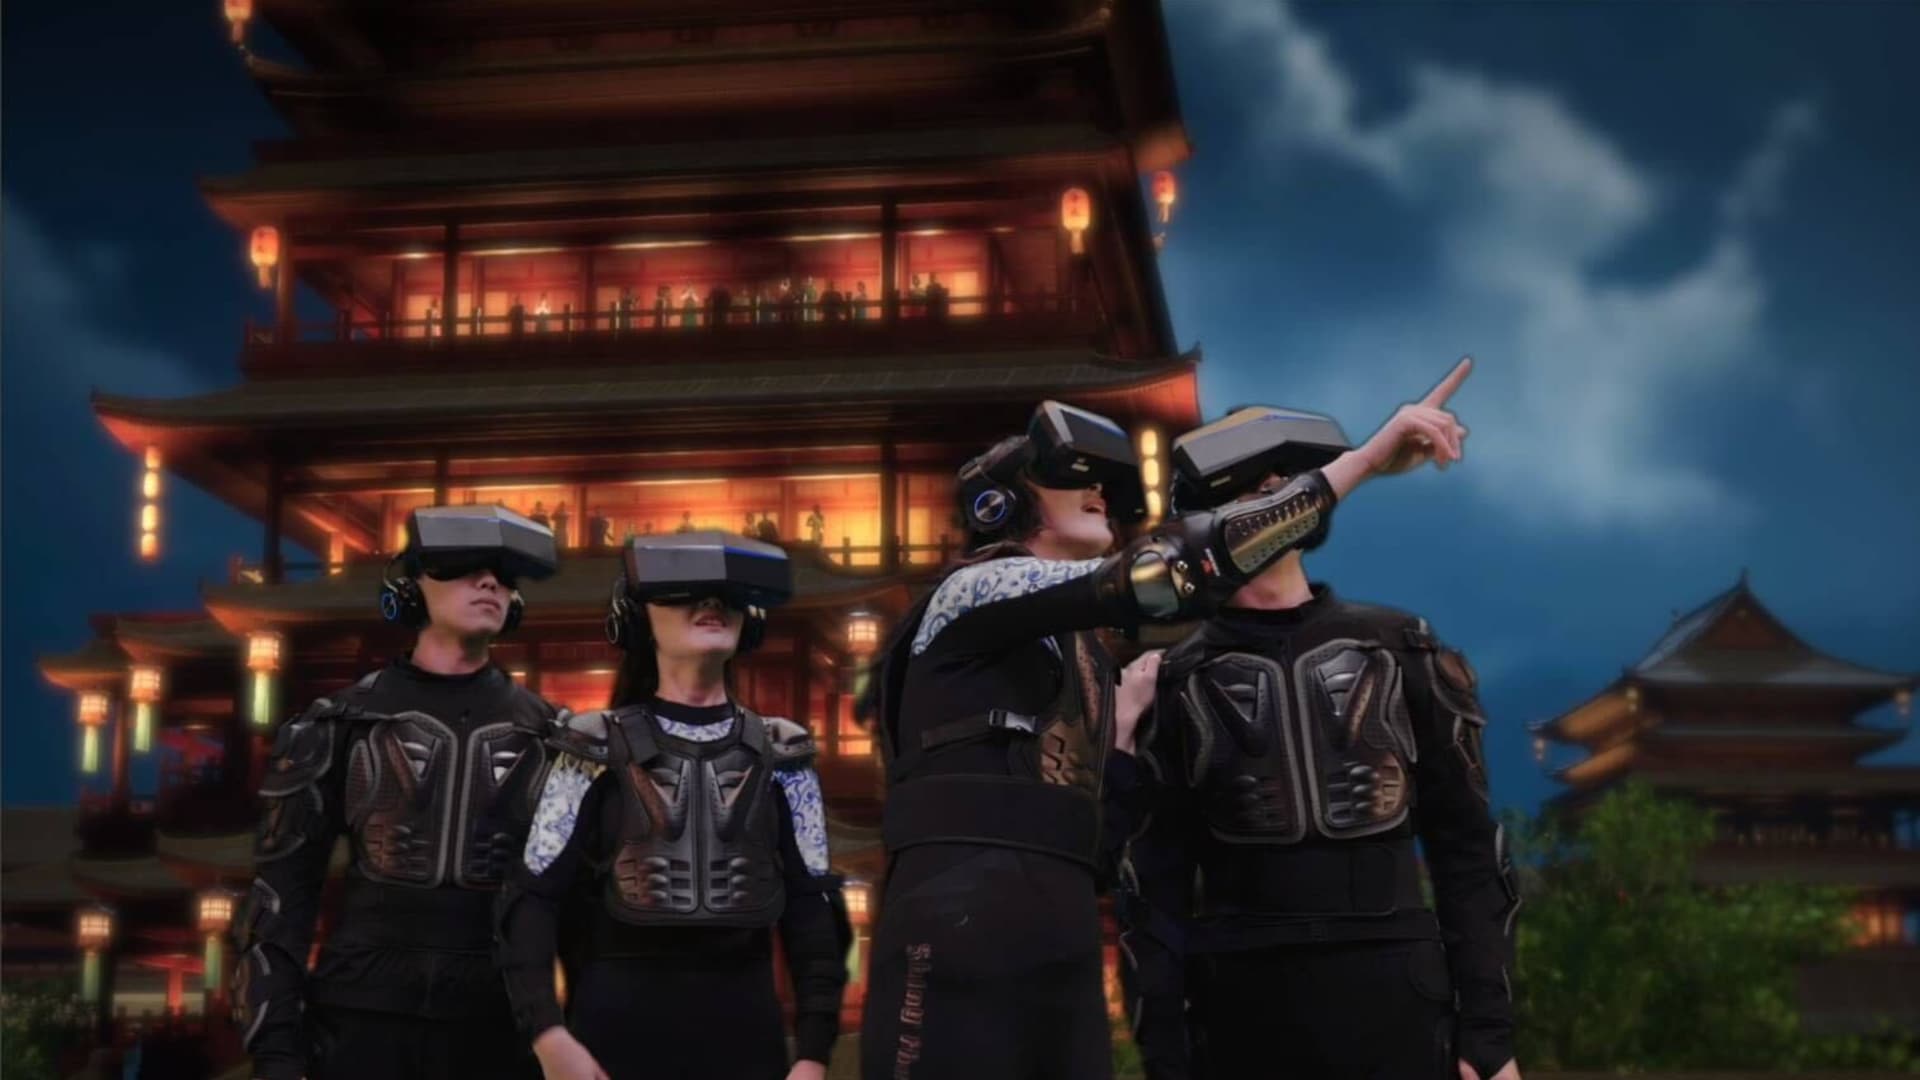 ‘China’s Netflix’ iQiyi launches an immersive VR ride based on its own show